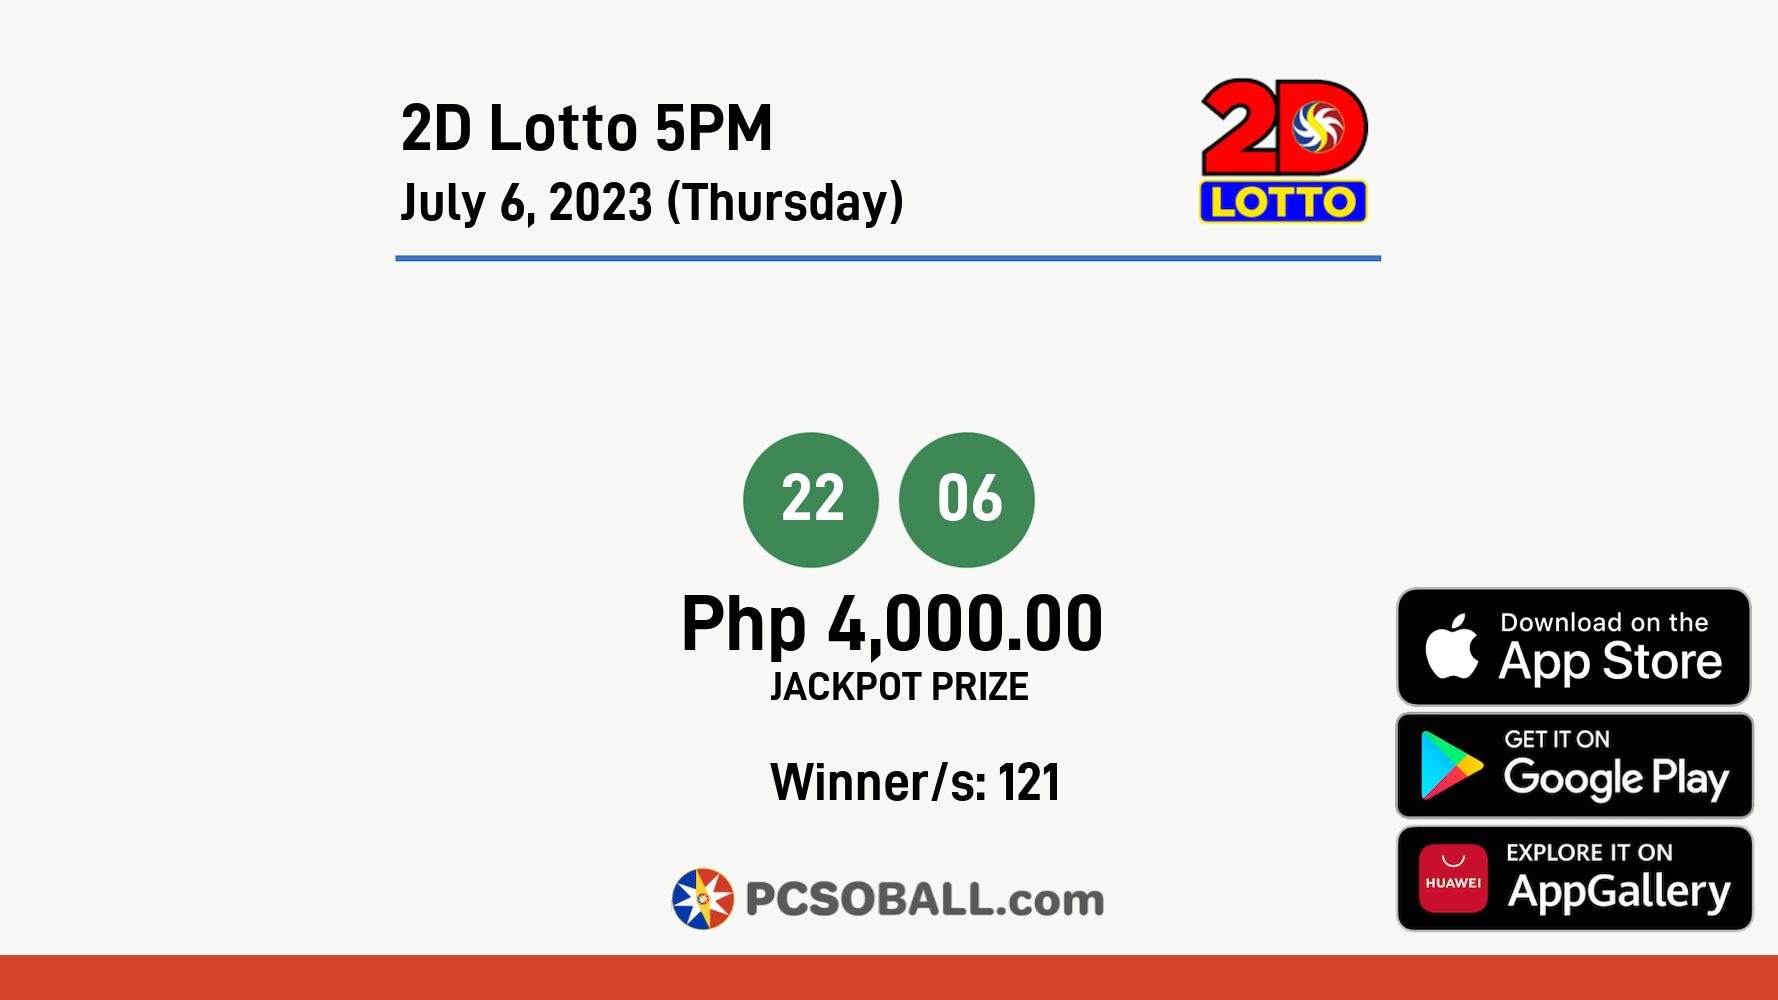 2D Lotto 5PM July 6, 2023 (Thursday) Result